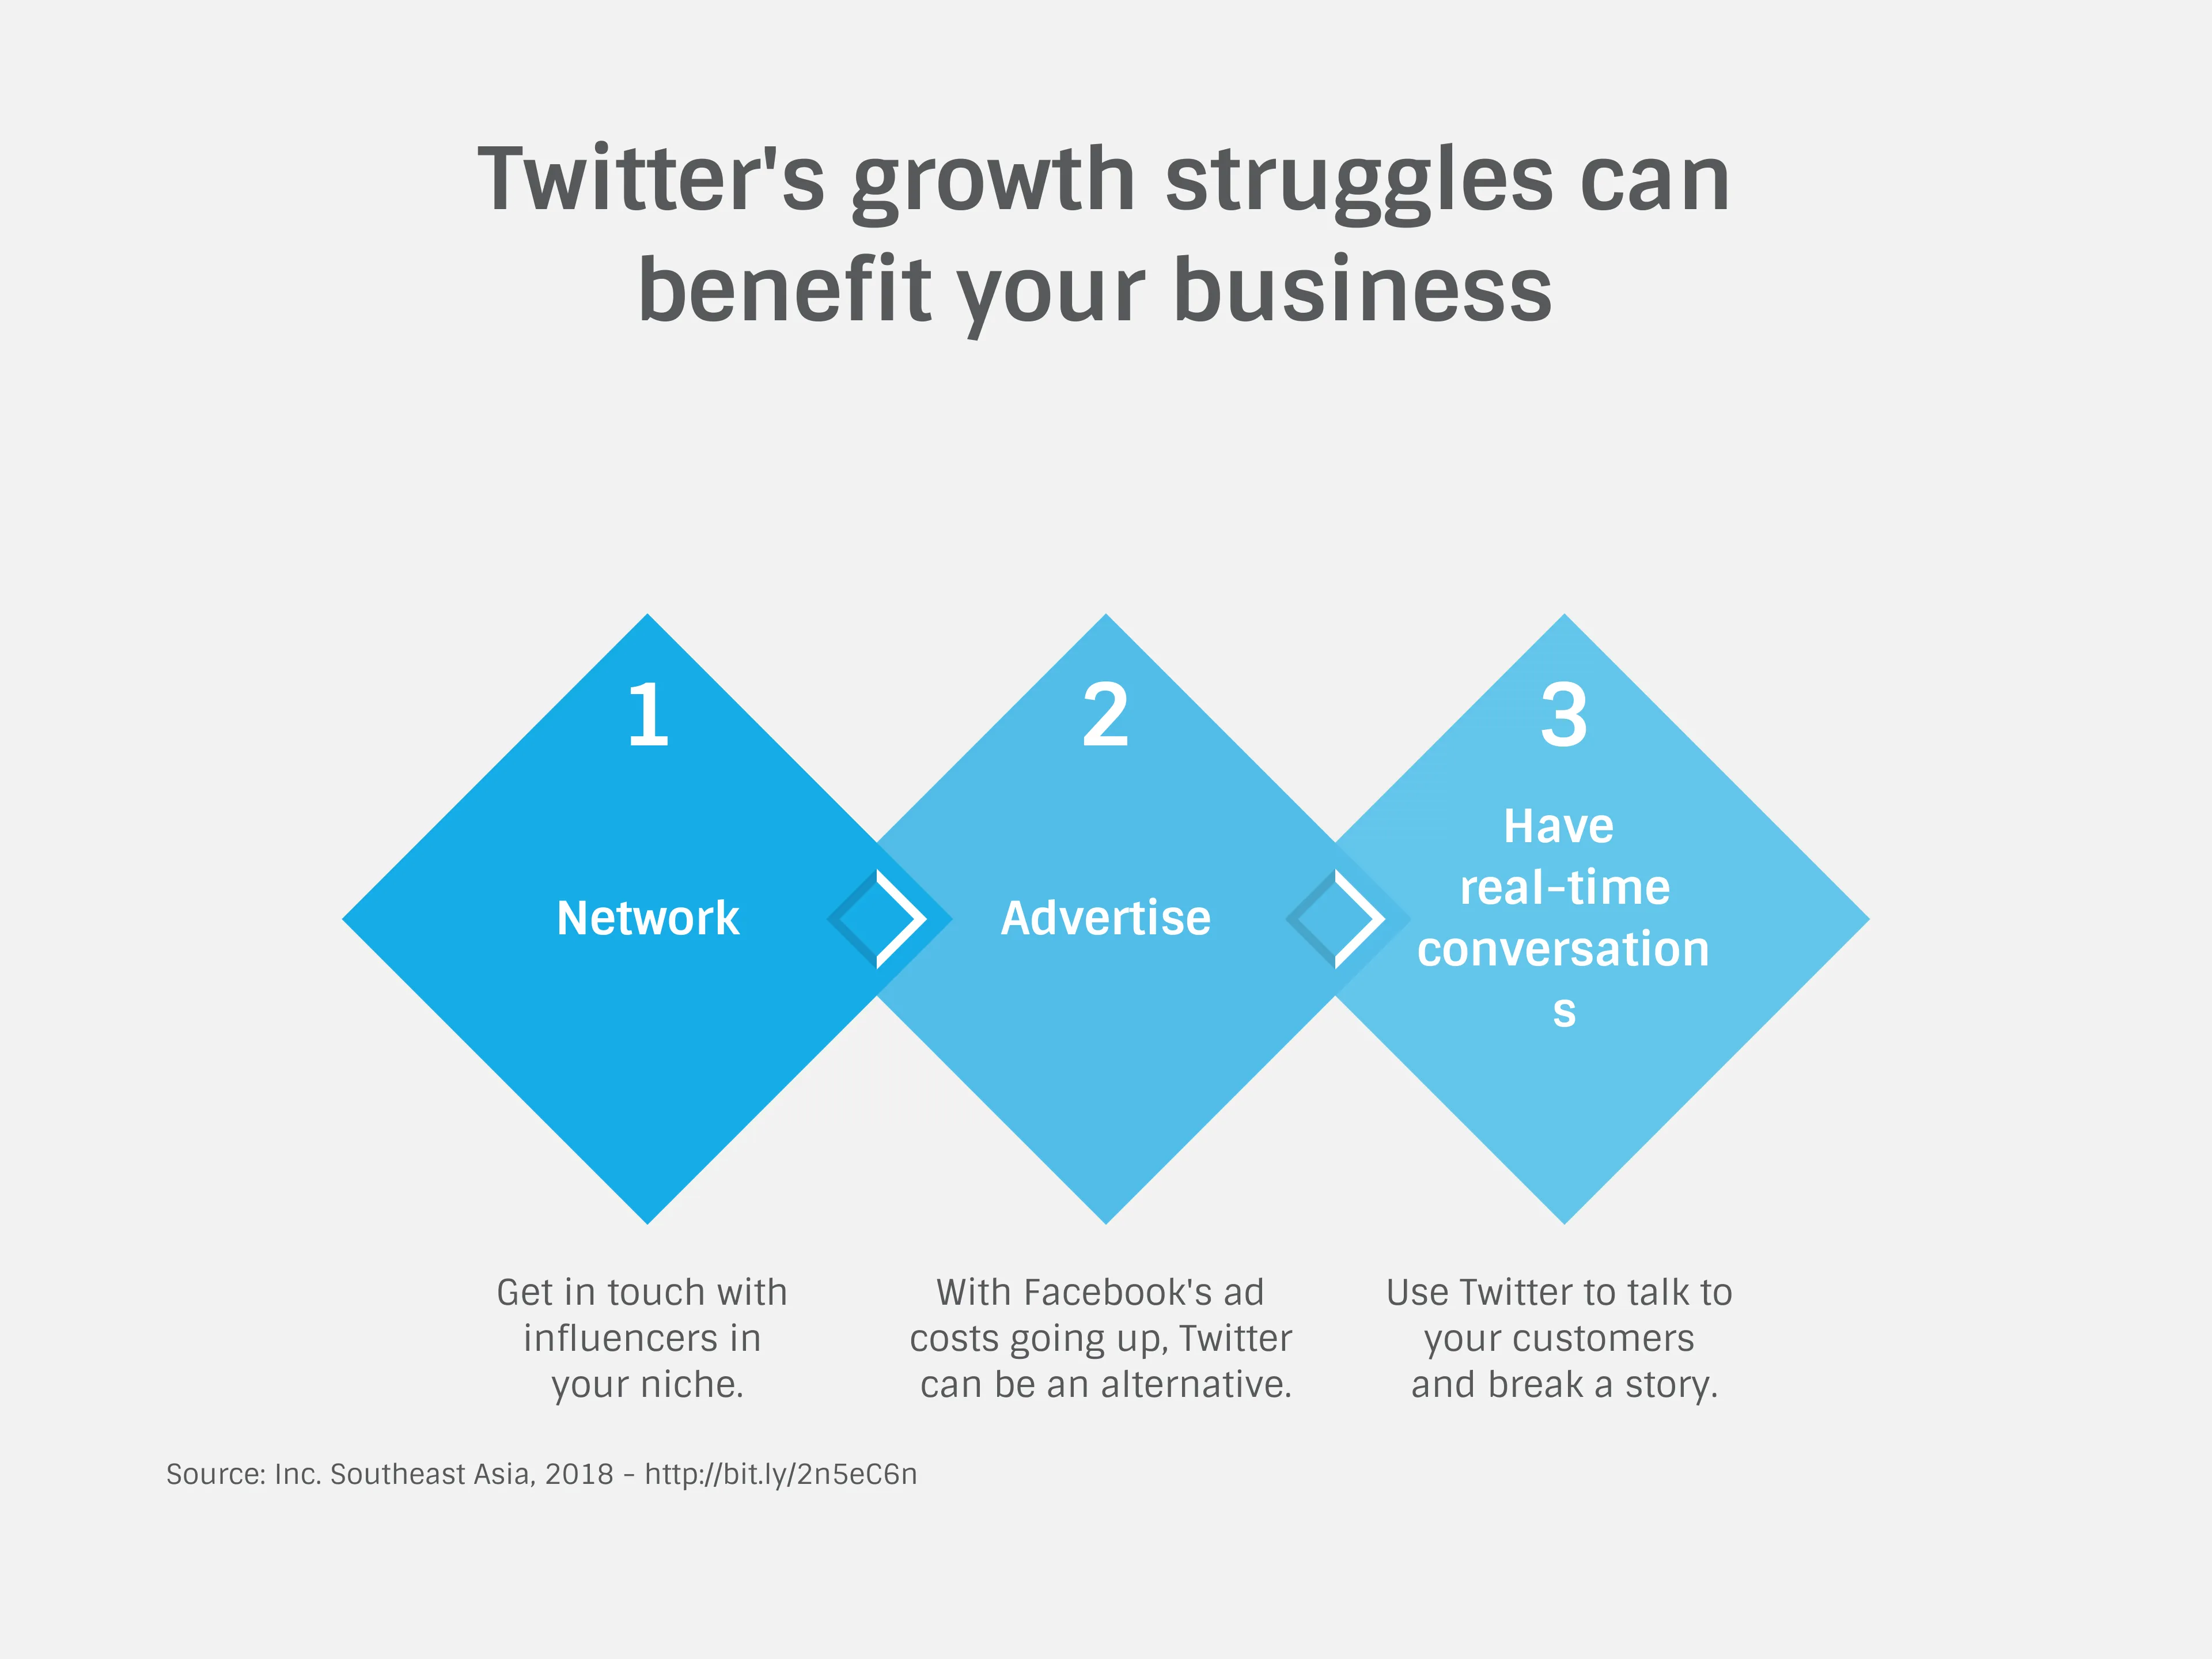 Twitter's growth struggles can benefit your business